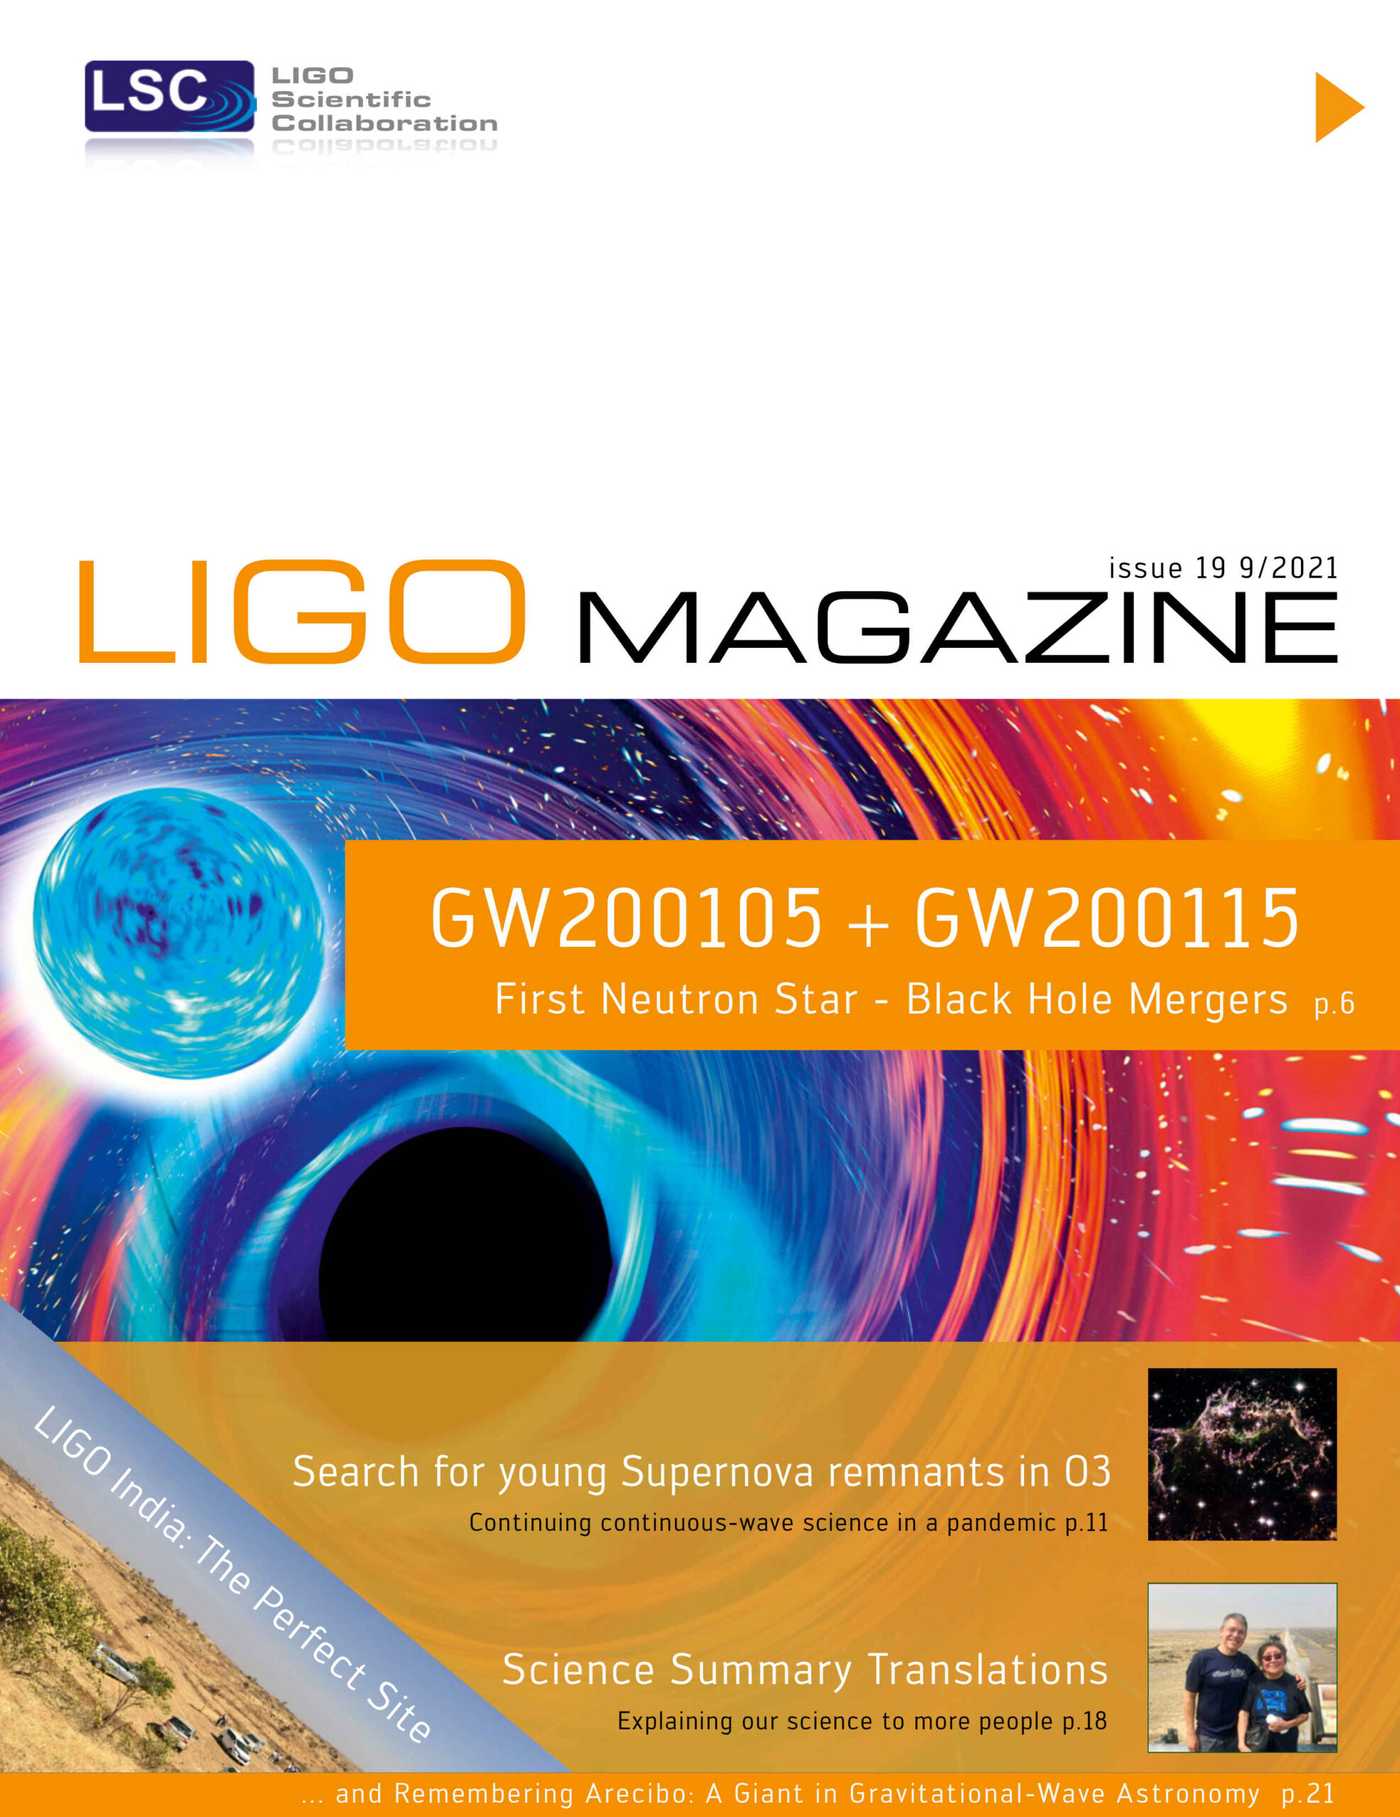 News-Image 15 of: New LIGO Magazine Issue 19 is out